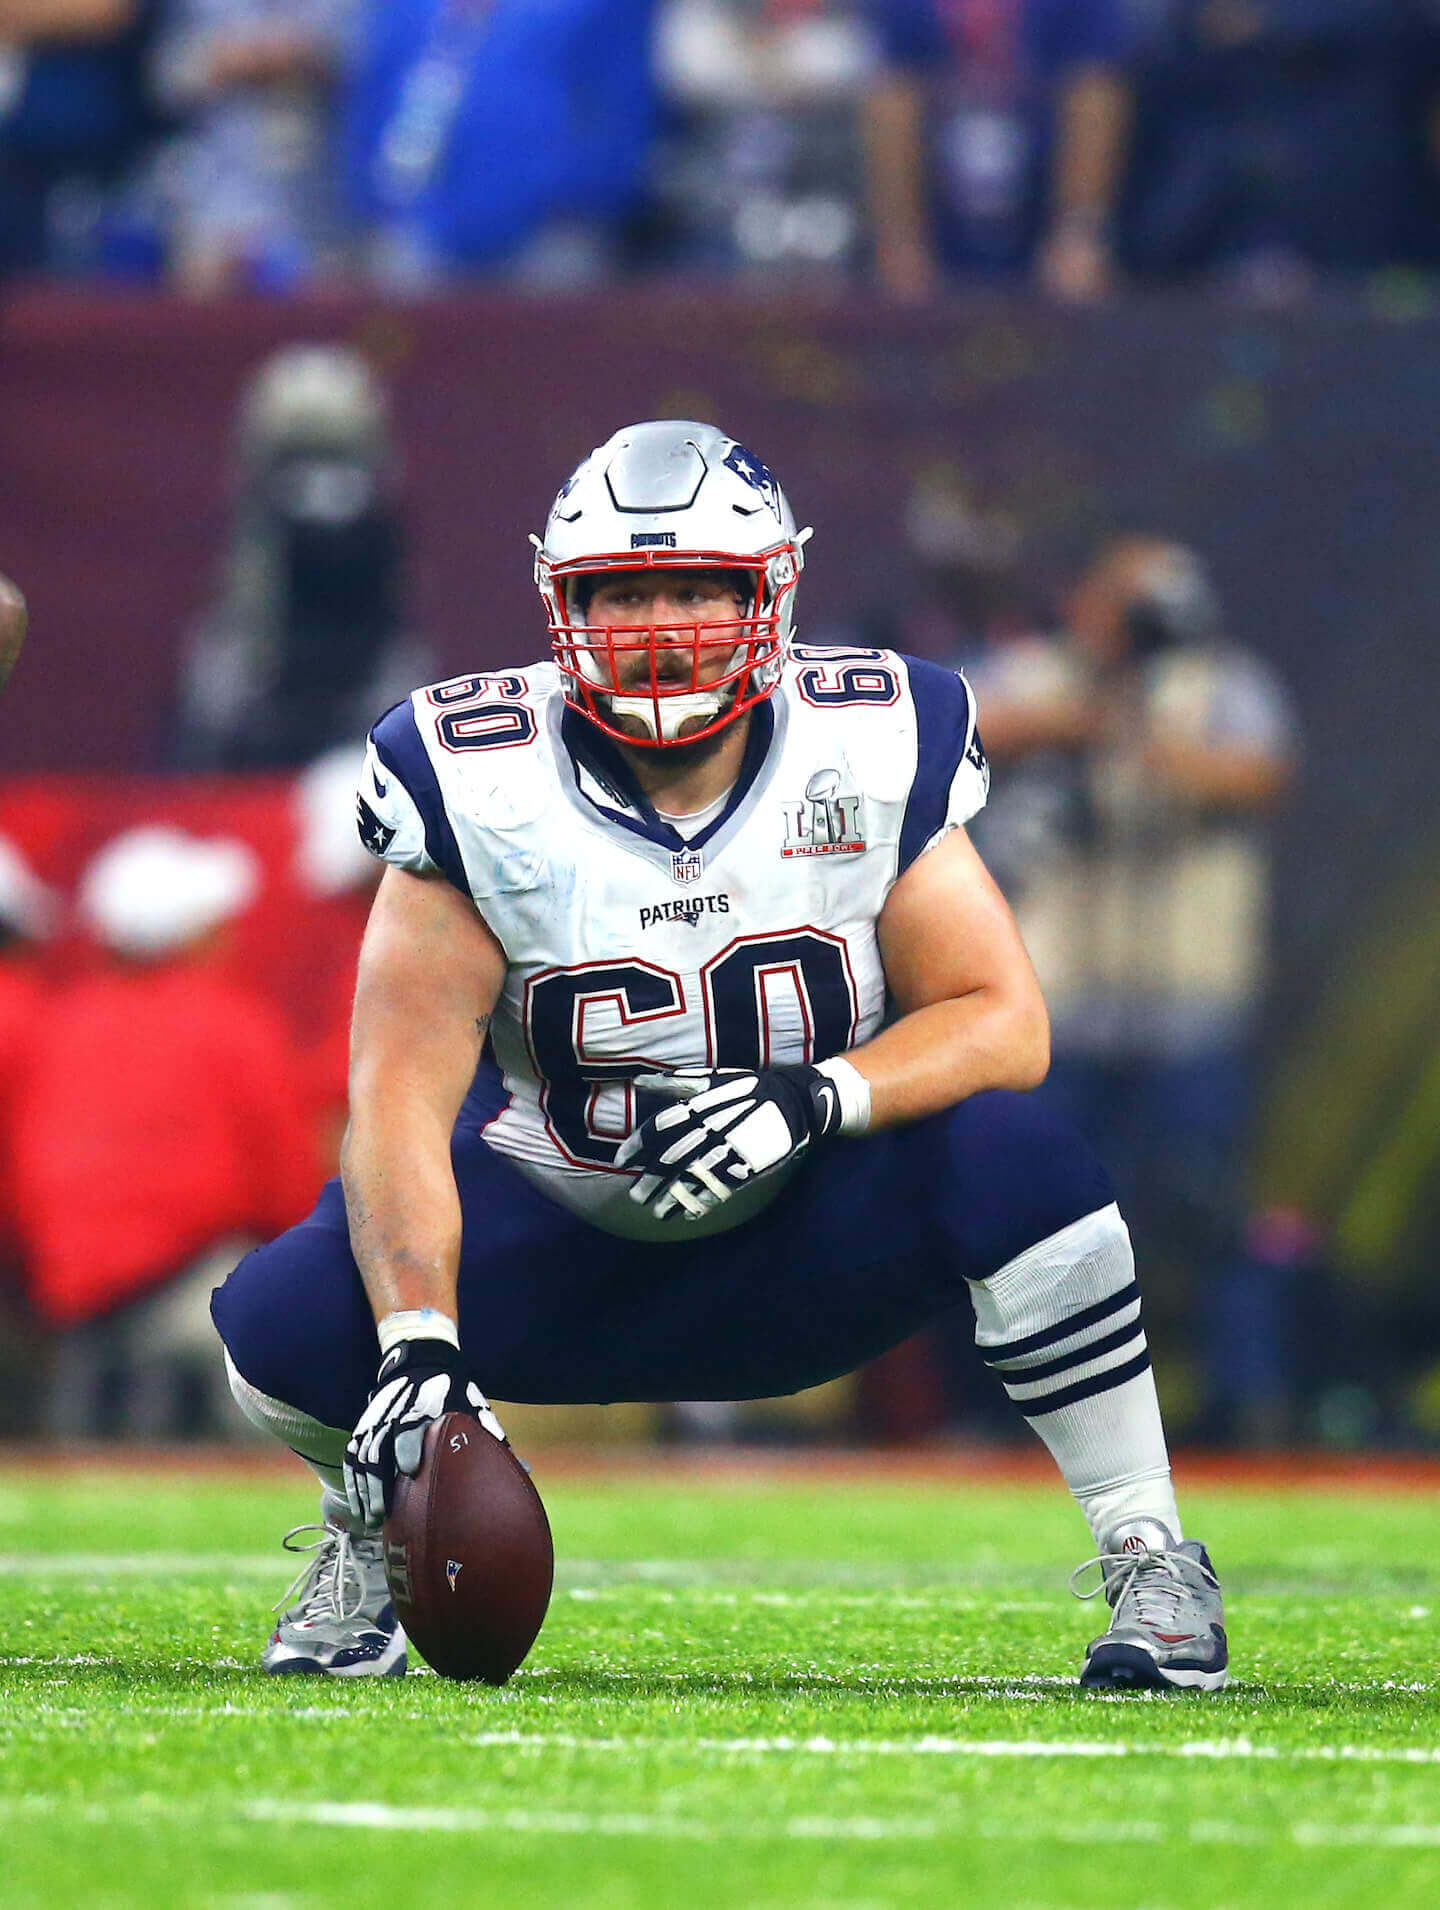 David Andrews #60 is part of the team New England Patriots